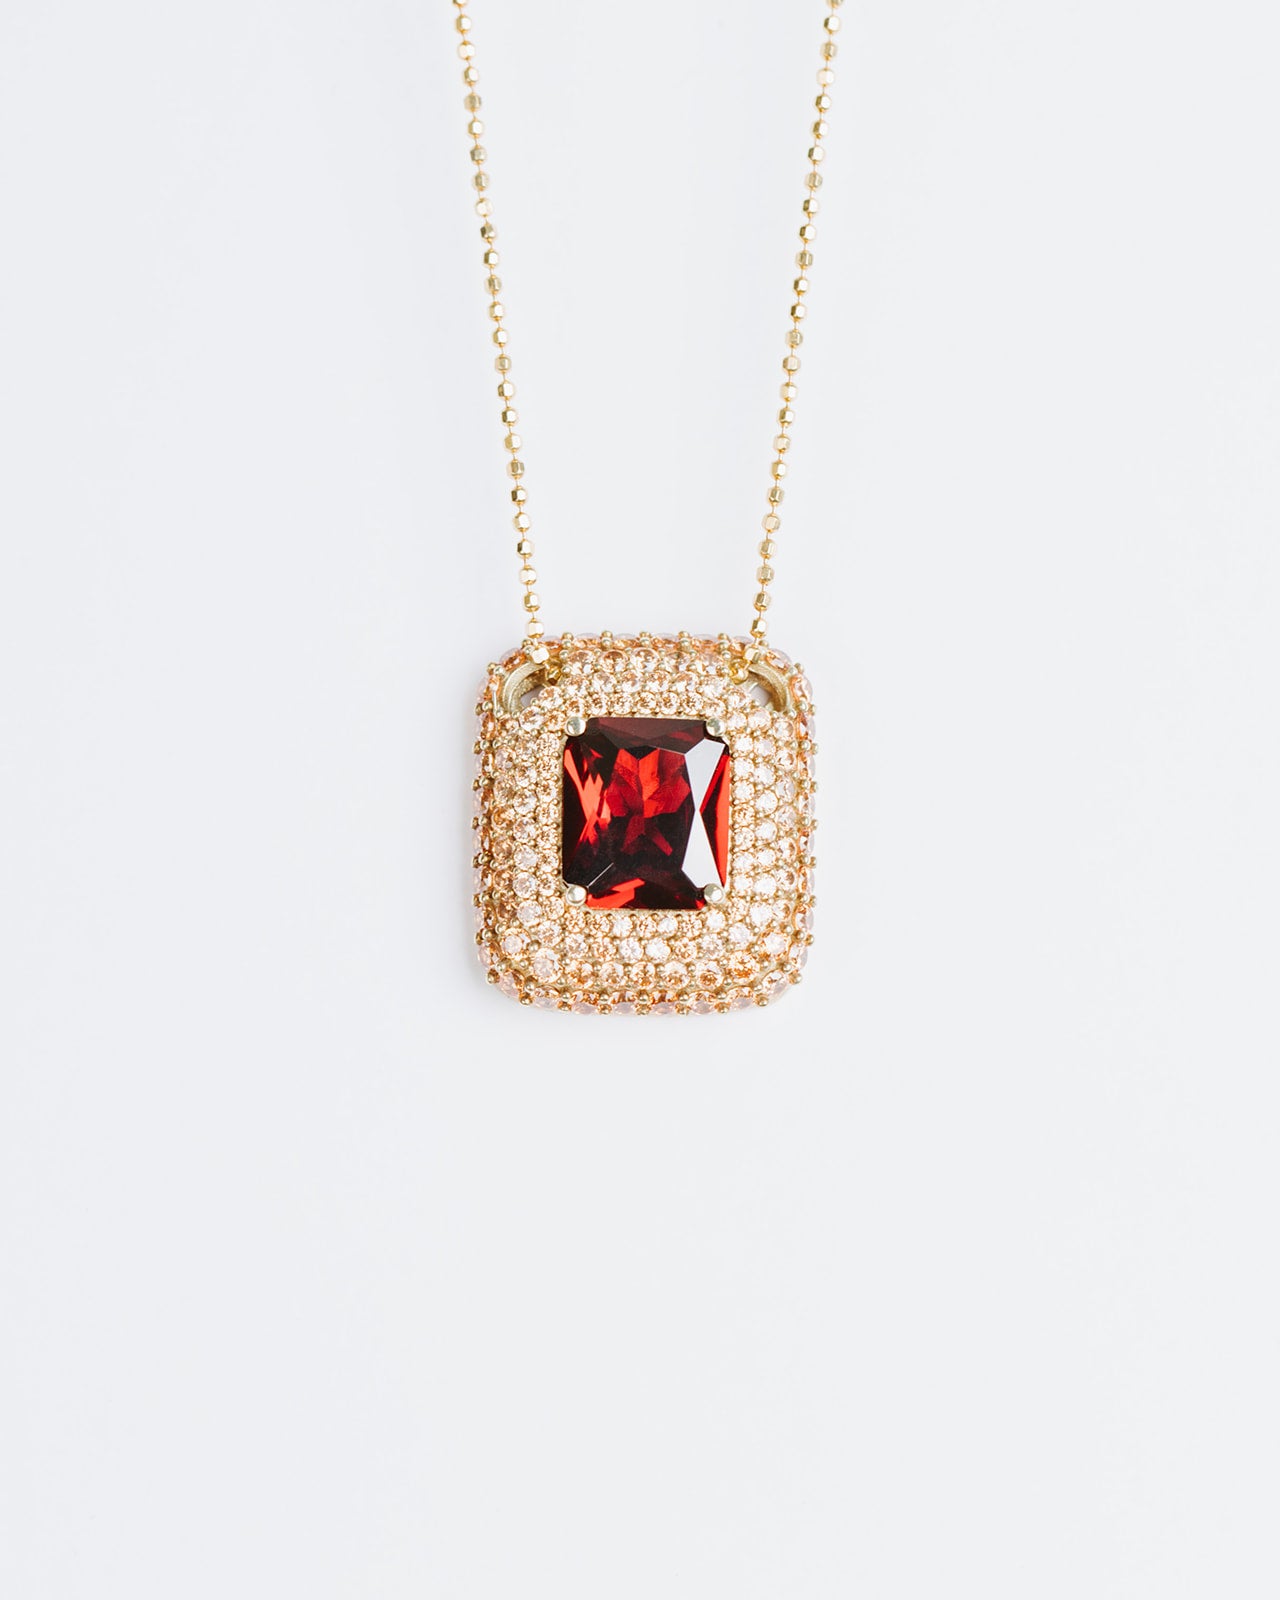 Elegance Champagne Pave Pendant with Pomegranate